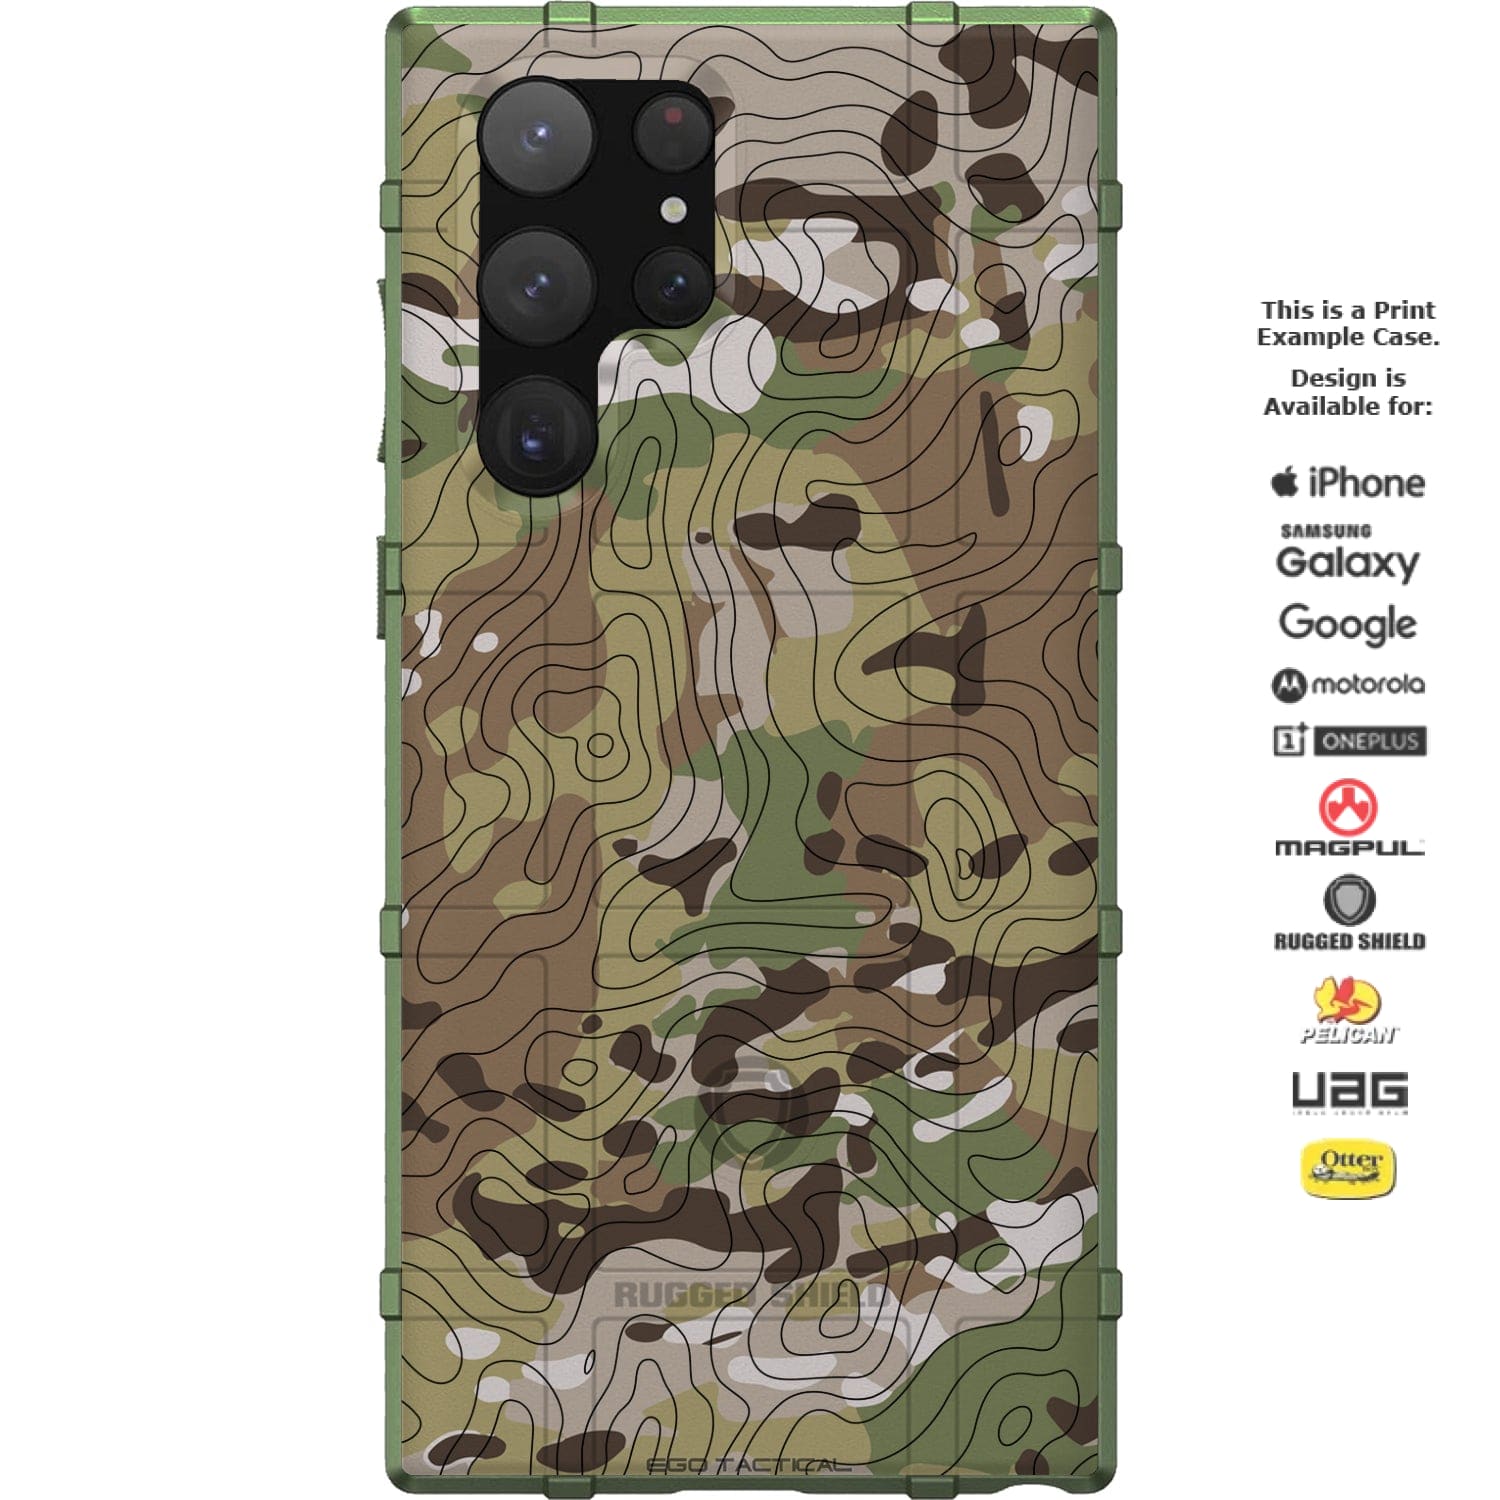 Topography over Multicam Camouflage Custom Printed Android & Apple Phone Case Design